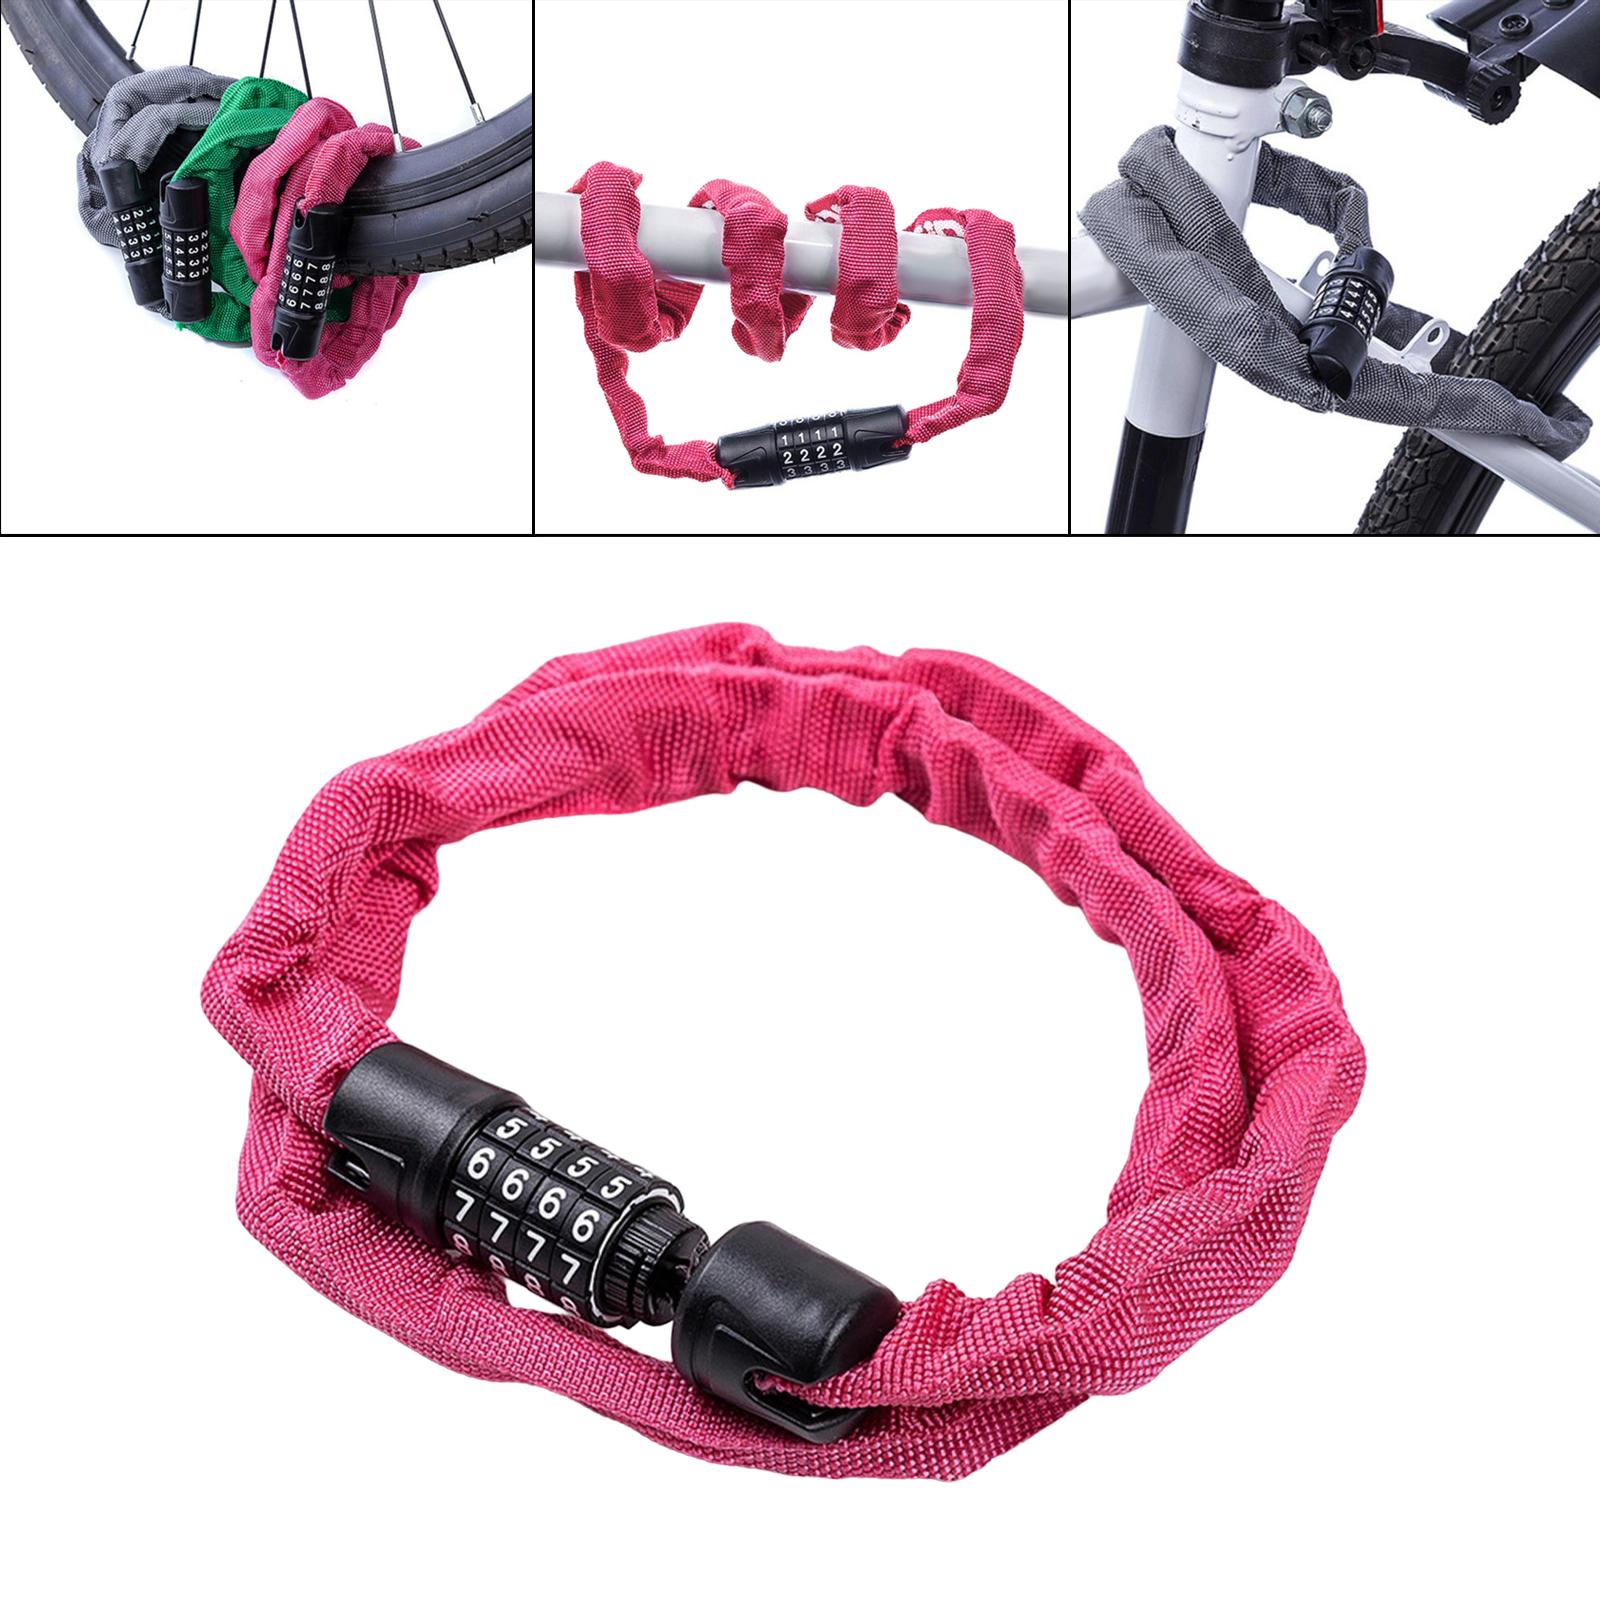 Folding Bike Chain Lock Cycling 4 Digit Password Code Accessories red